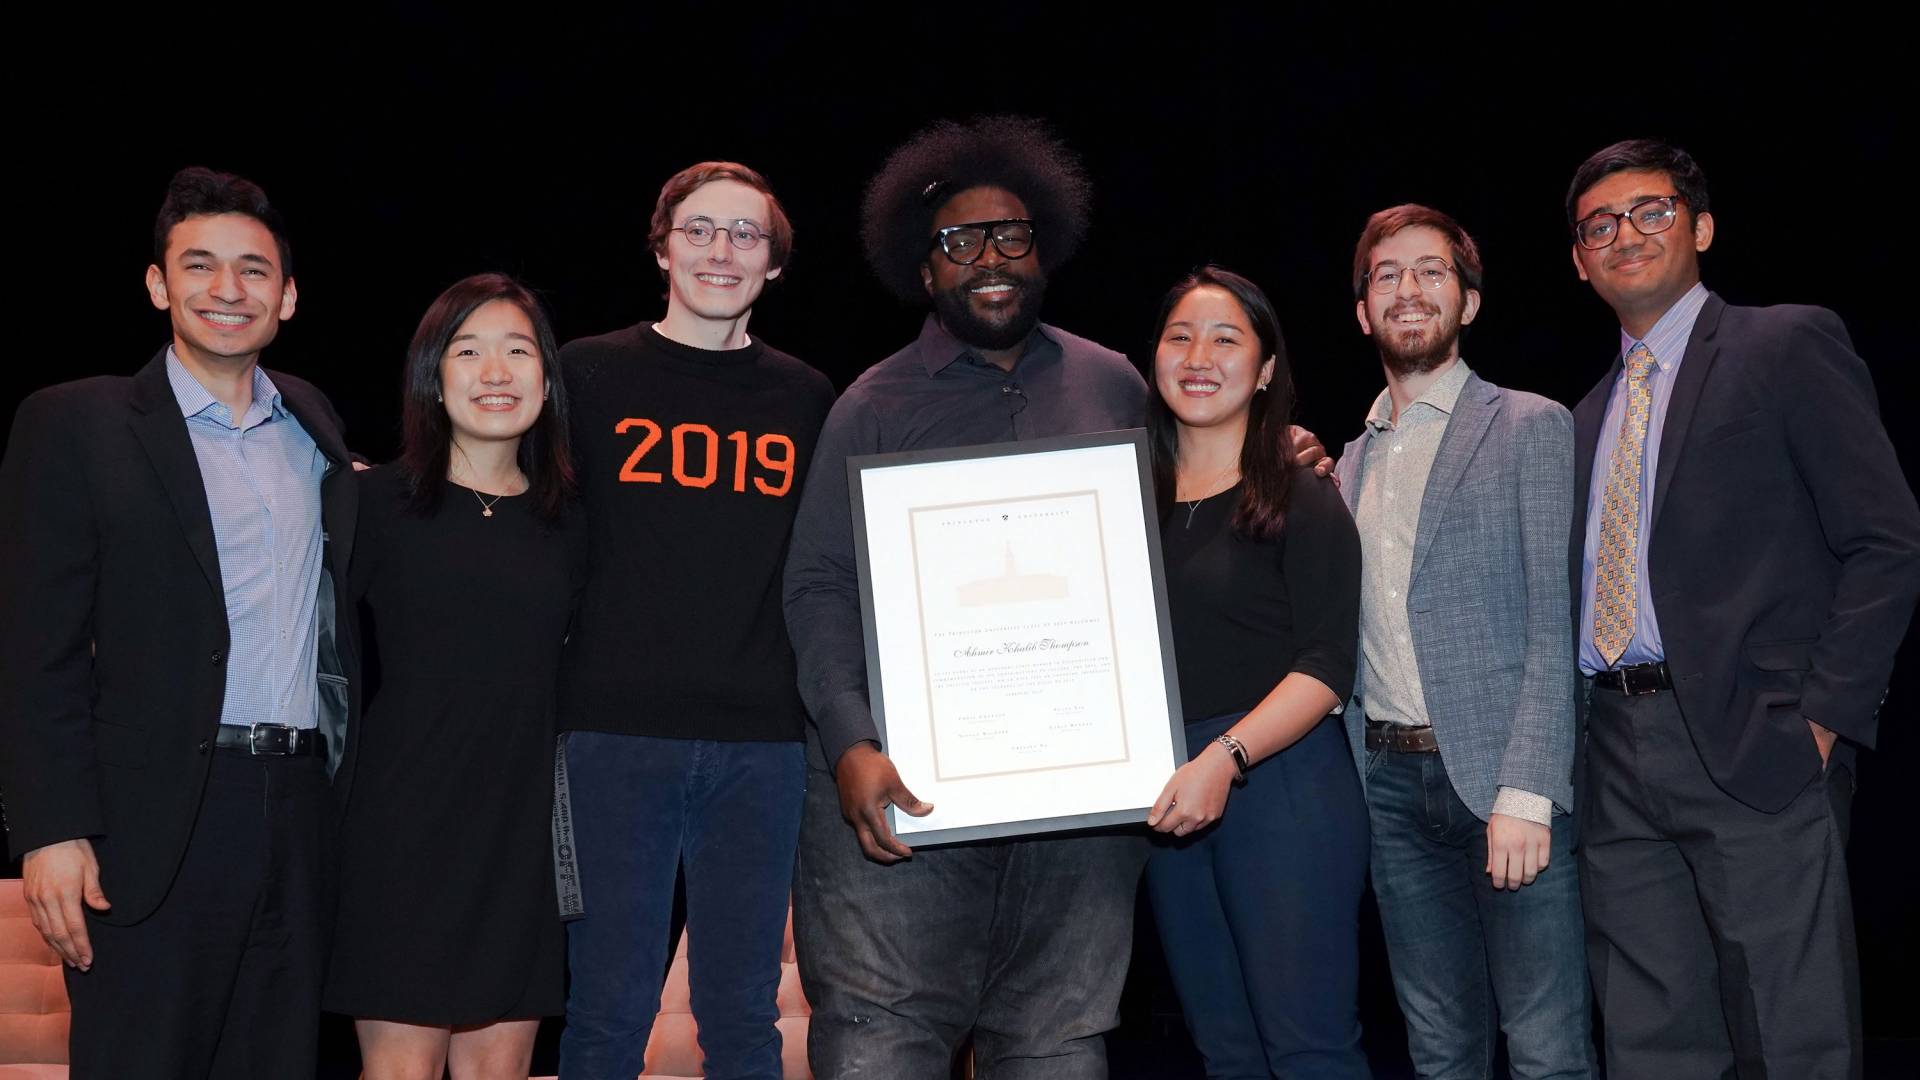 Questlove standing with Princeton seniors holding a certificate for honorary membership of the Class of 2019